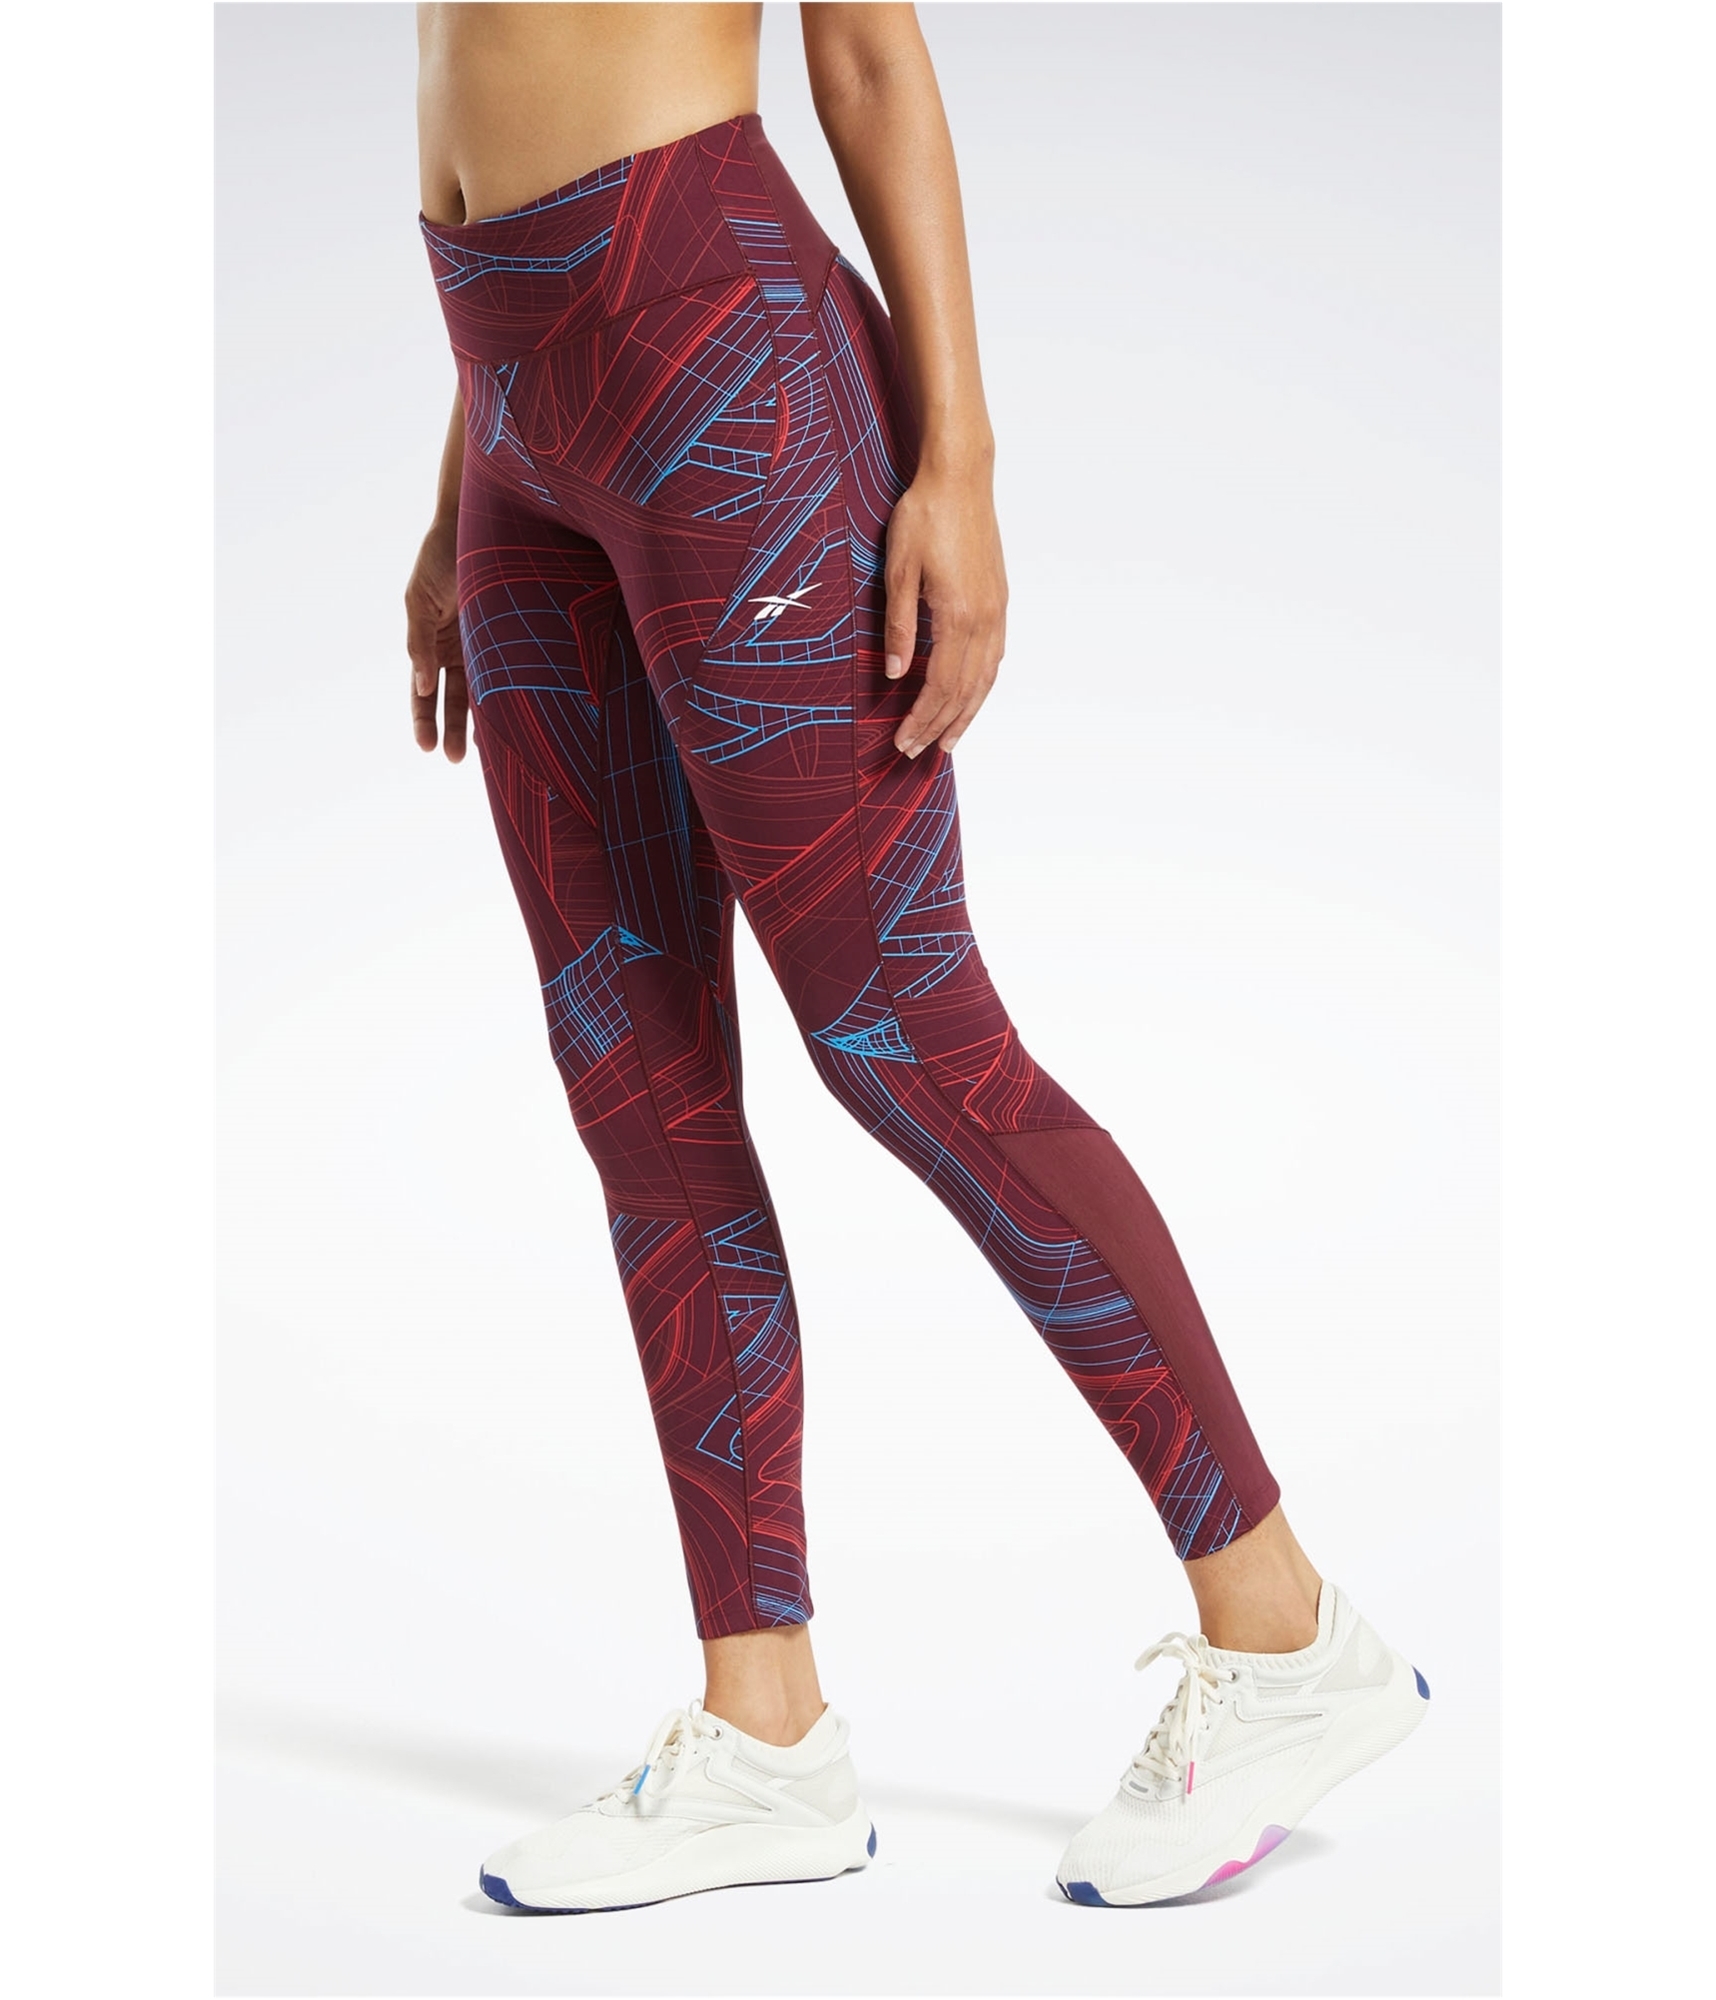 Buy a Womens Reebok Lux Compression Athletic Pants Online | TagsWeekly.com,  TW12